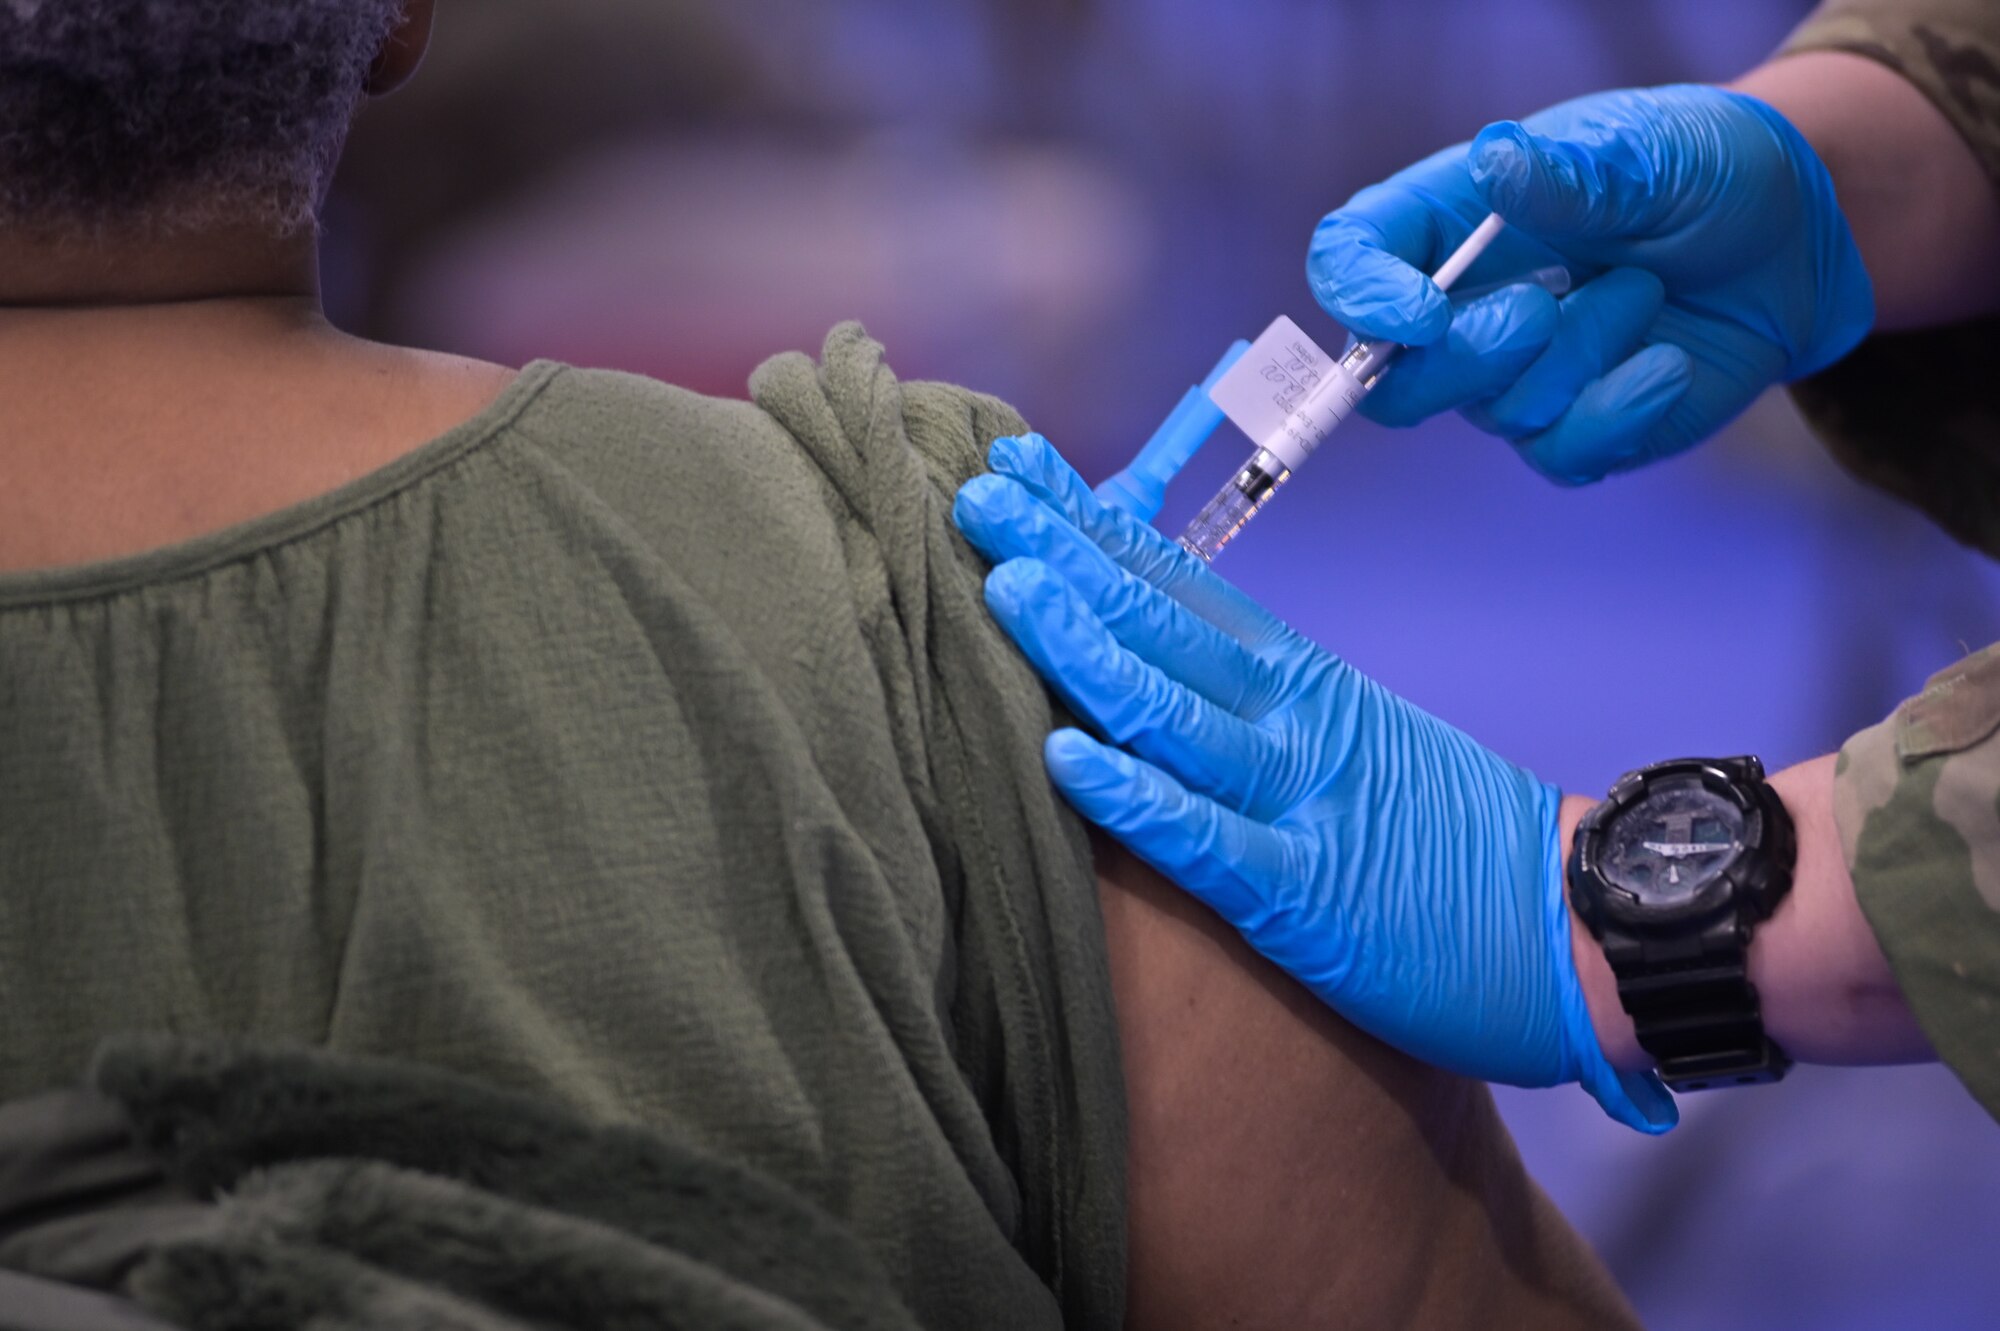 U.S. Army, Illinois National Guard combat medic administers COVID-19 vaccine to a patient in the South Suburban College gym, South Holland, Illinois, February 25, 2021. The gym is one of many vaccine administration sites located throughout Illinois.